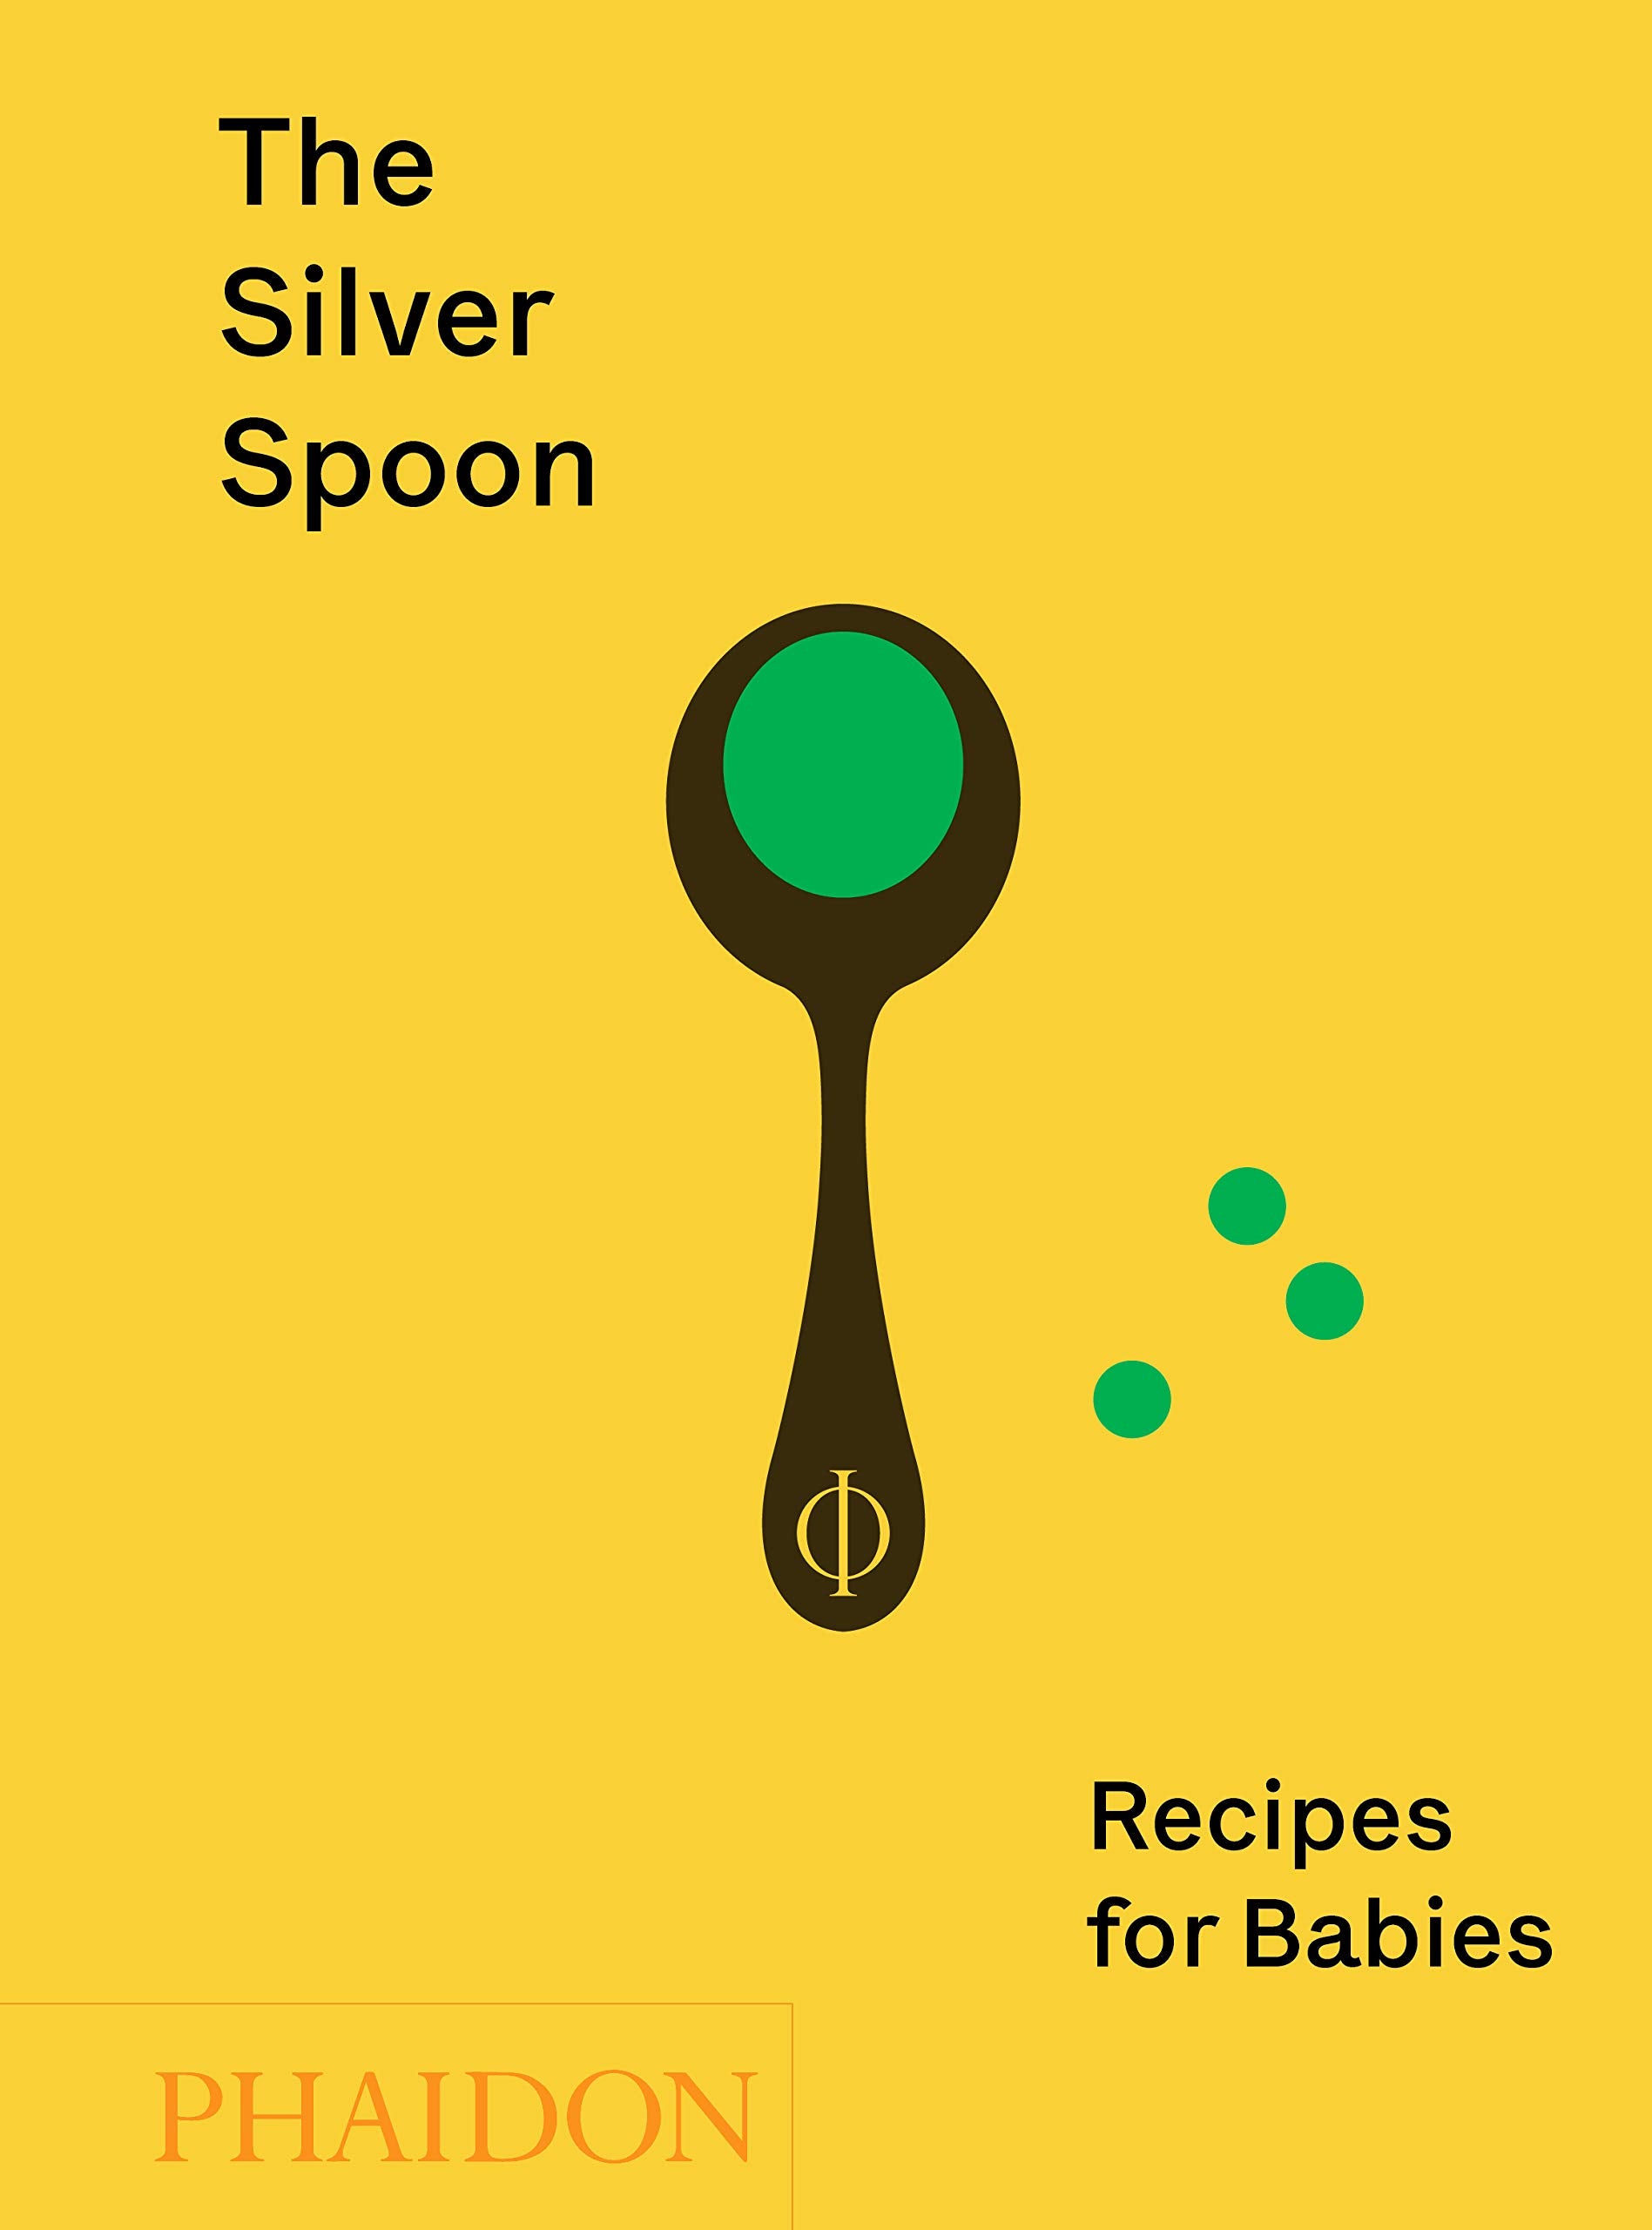 The Silver Spoon: Recipes for Babies